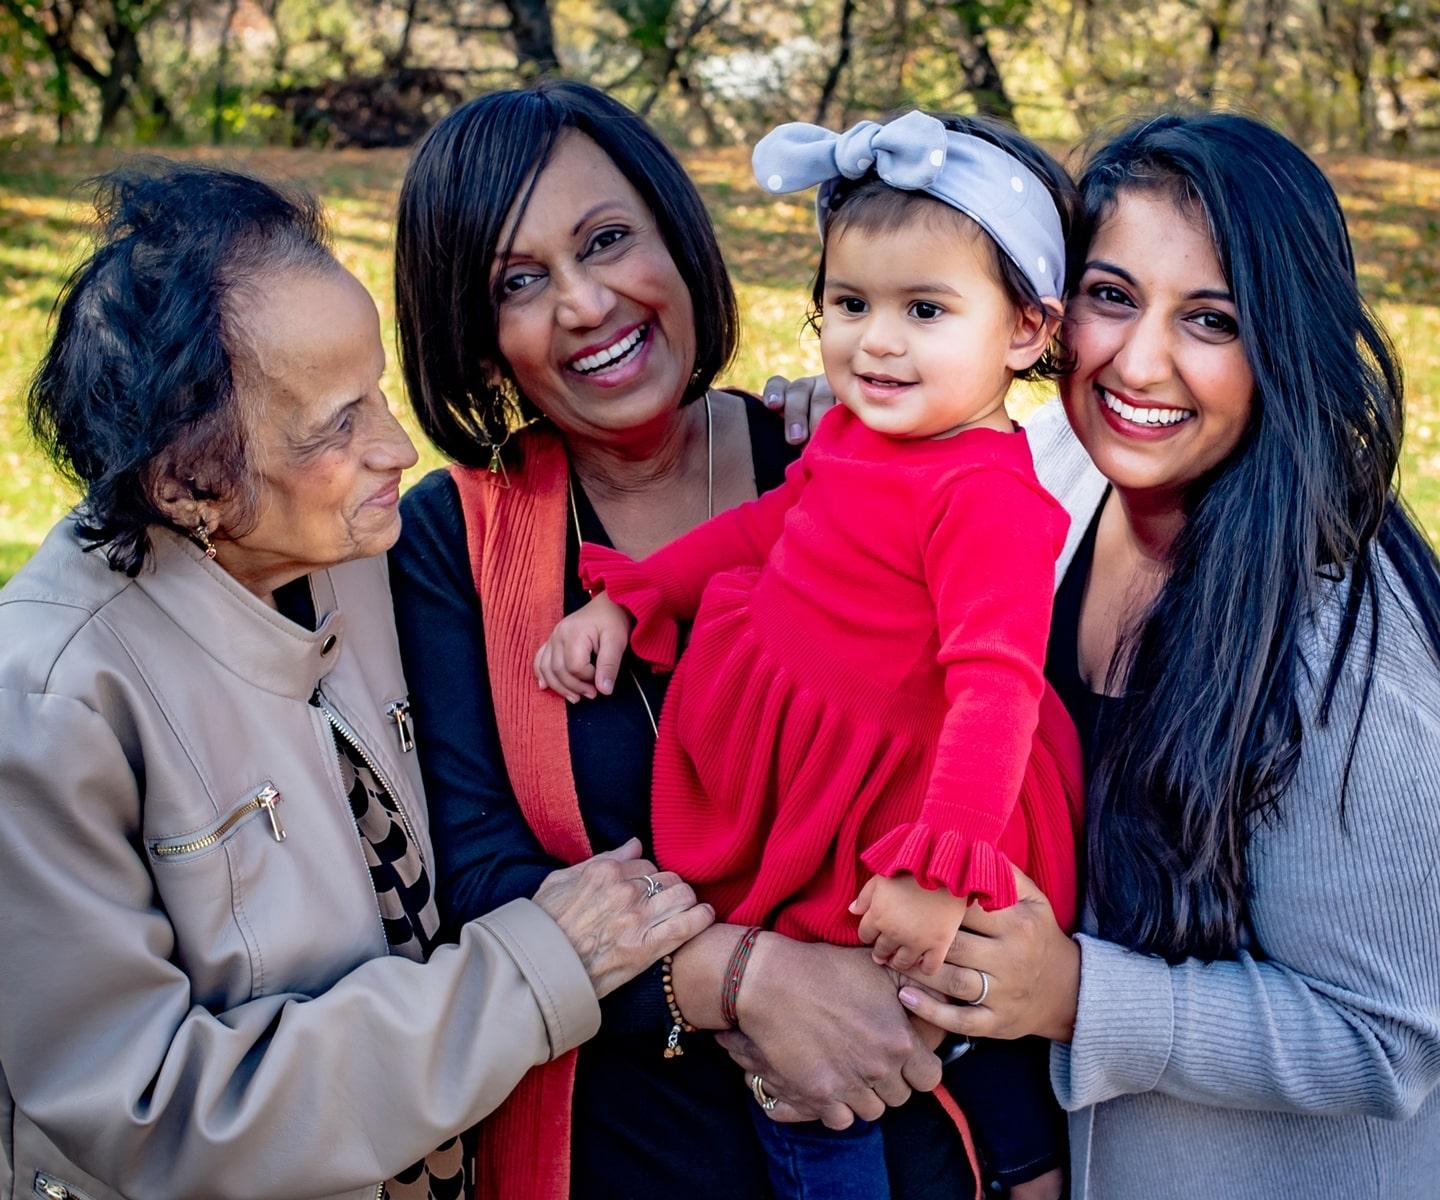 Blood recipient with mother, daughter and granddaughter at a park